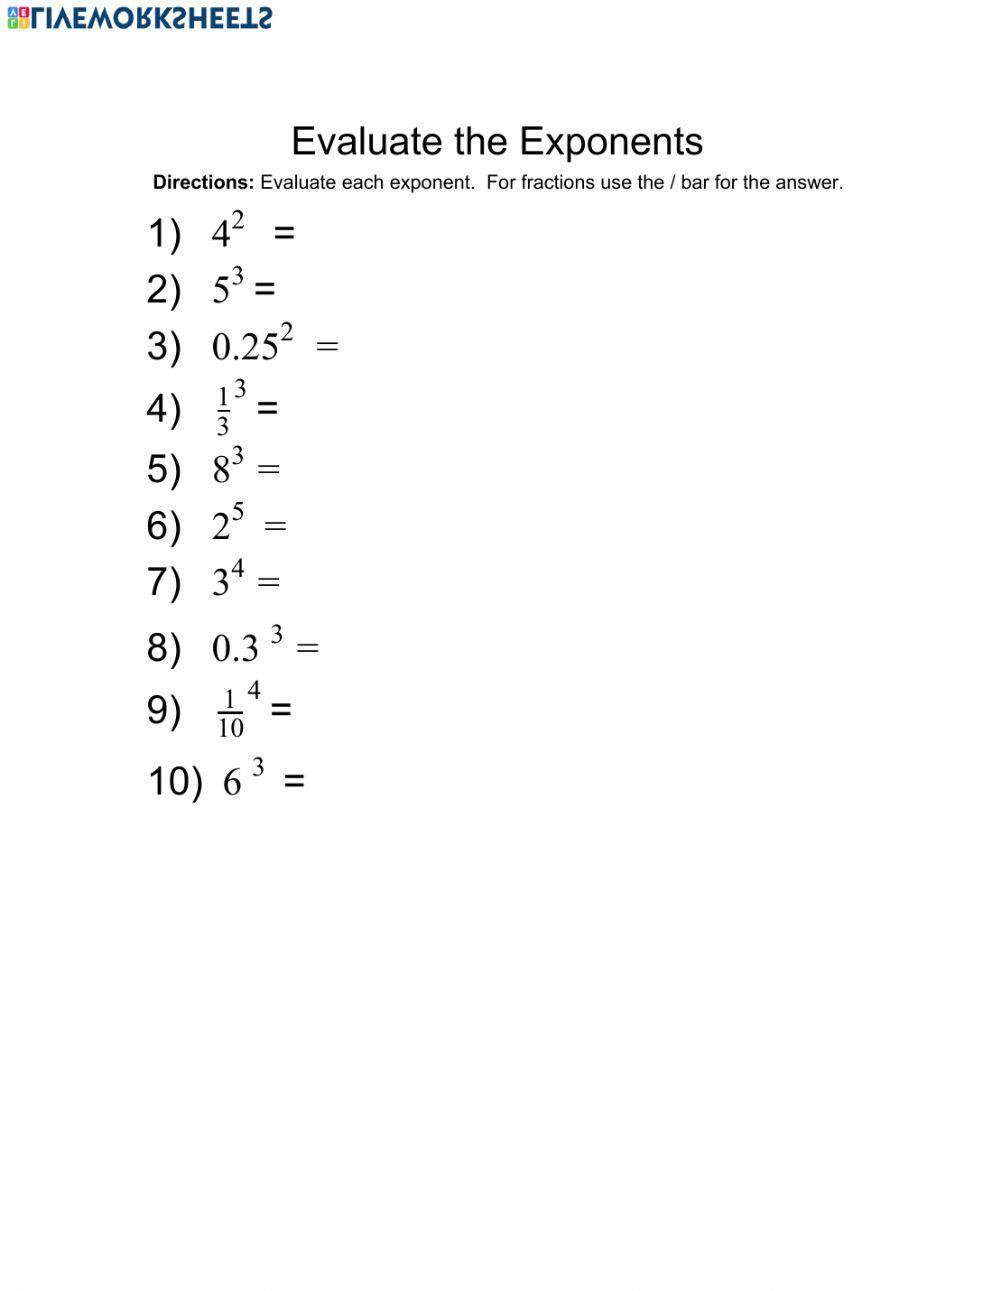 Evaluating Exponents 1